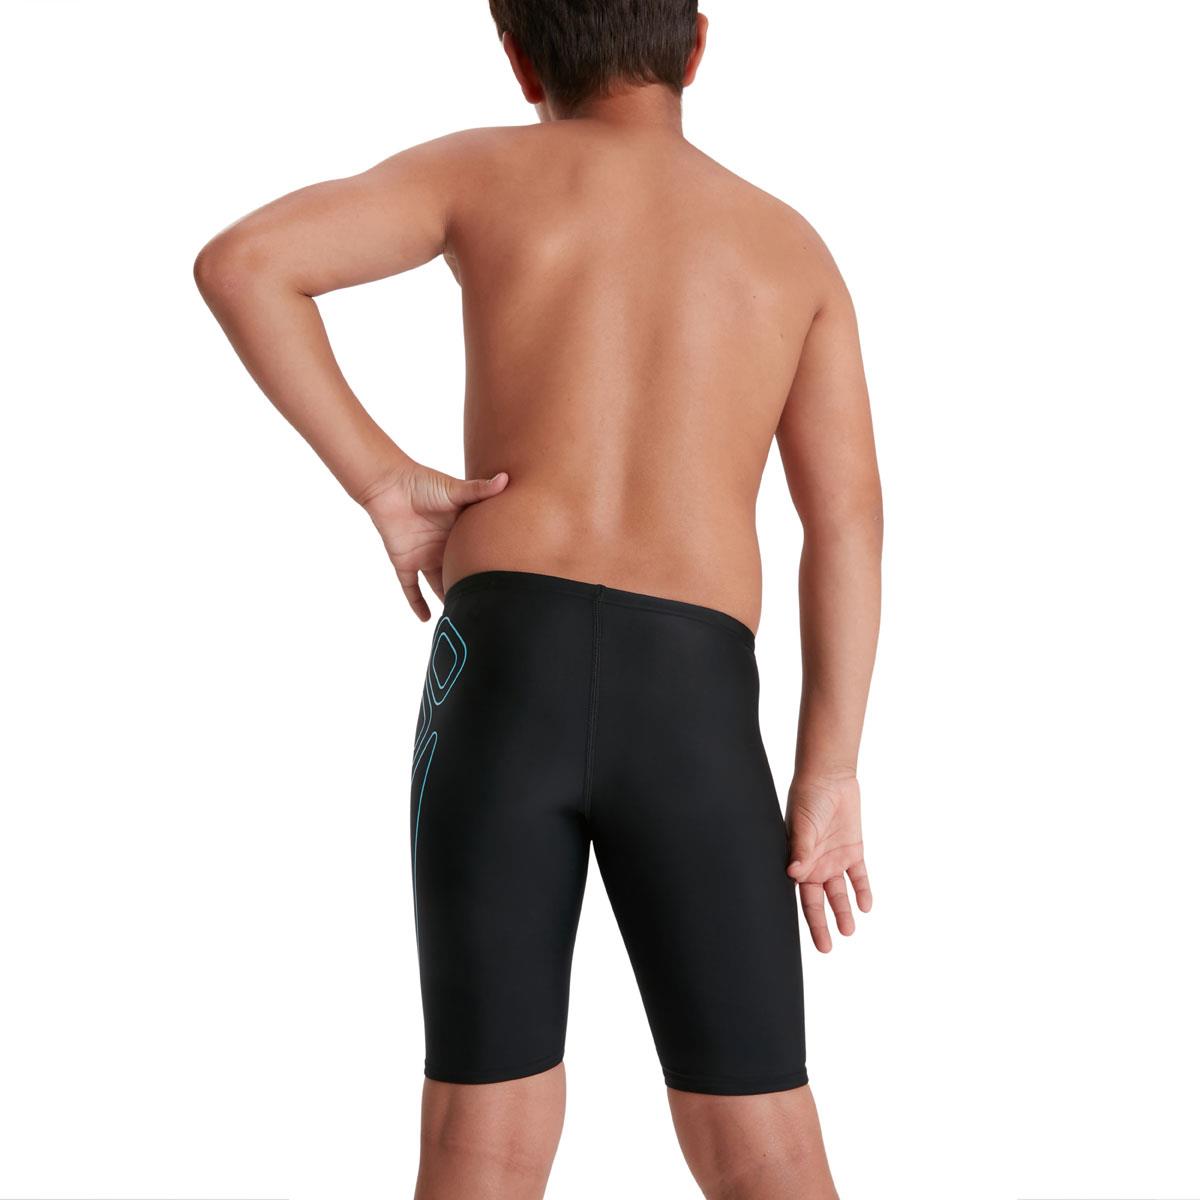 Speedo End Jammer Swim Shorts Youngster Boys Jammers Pants Trousers Bottoms 